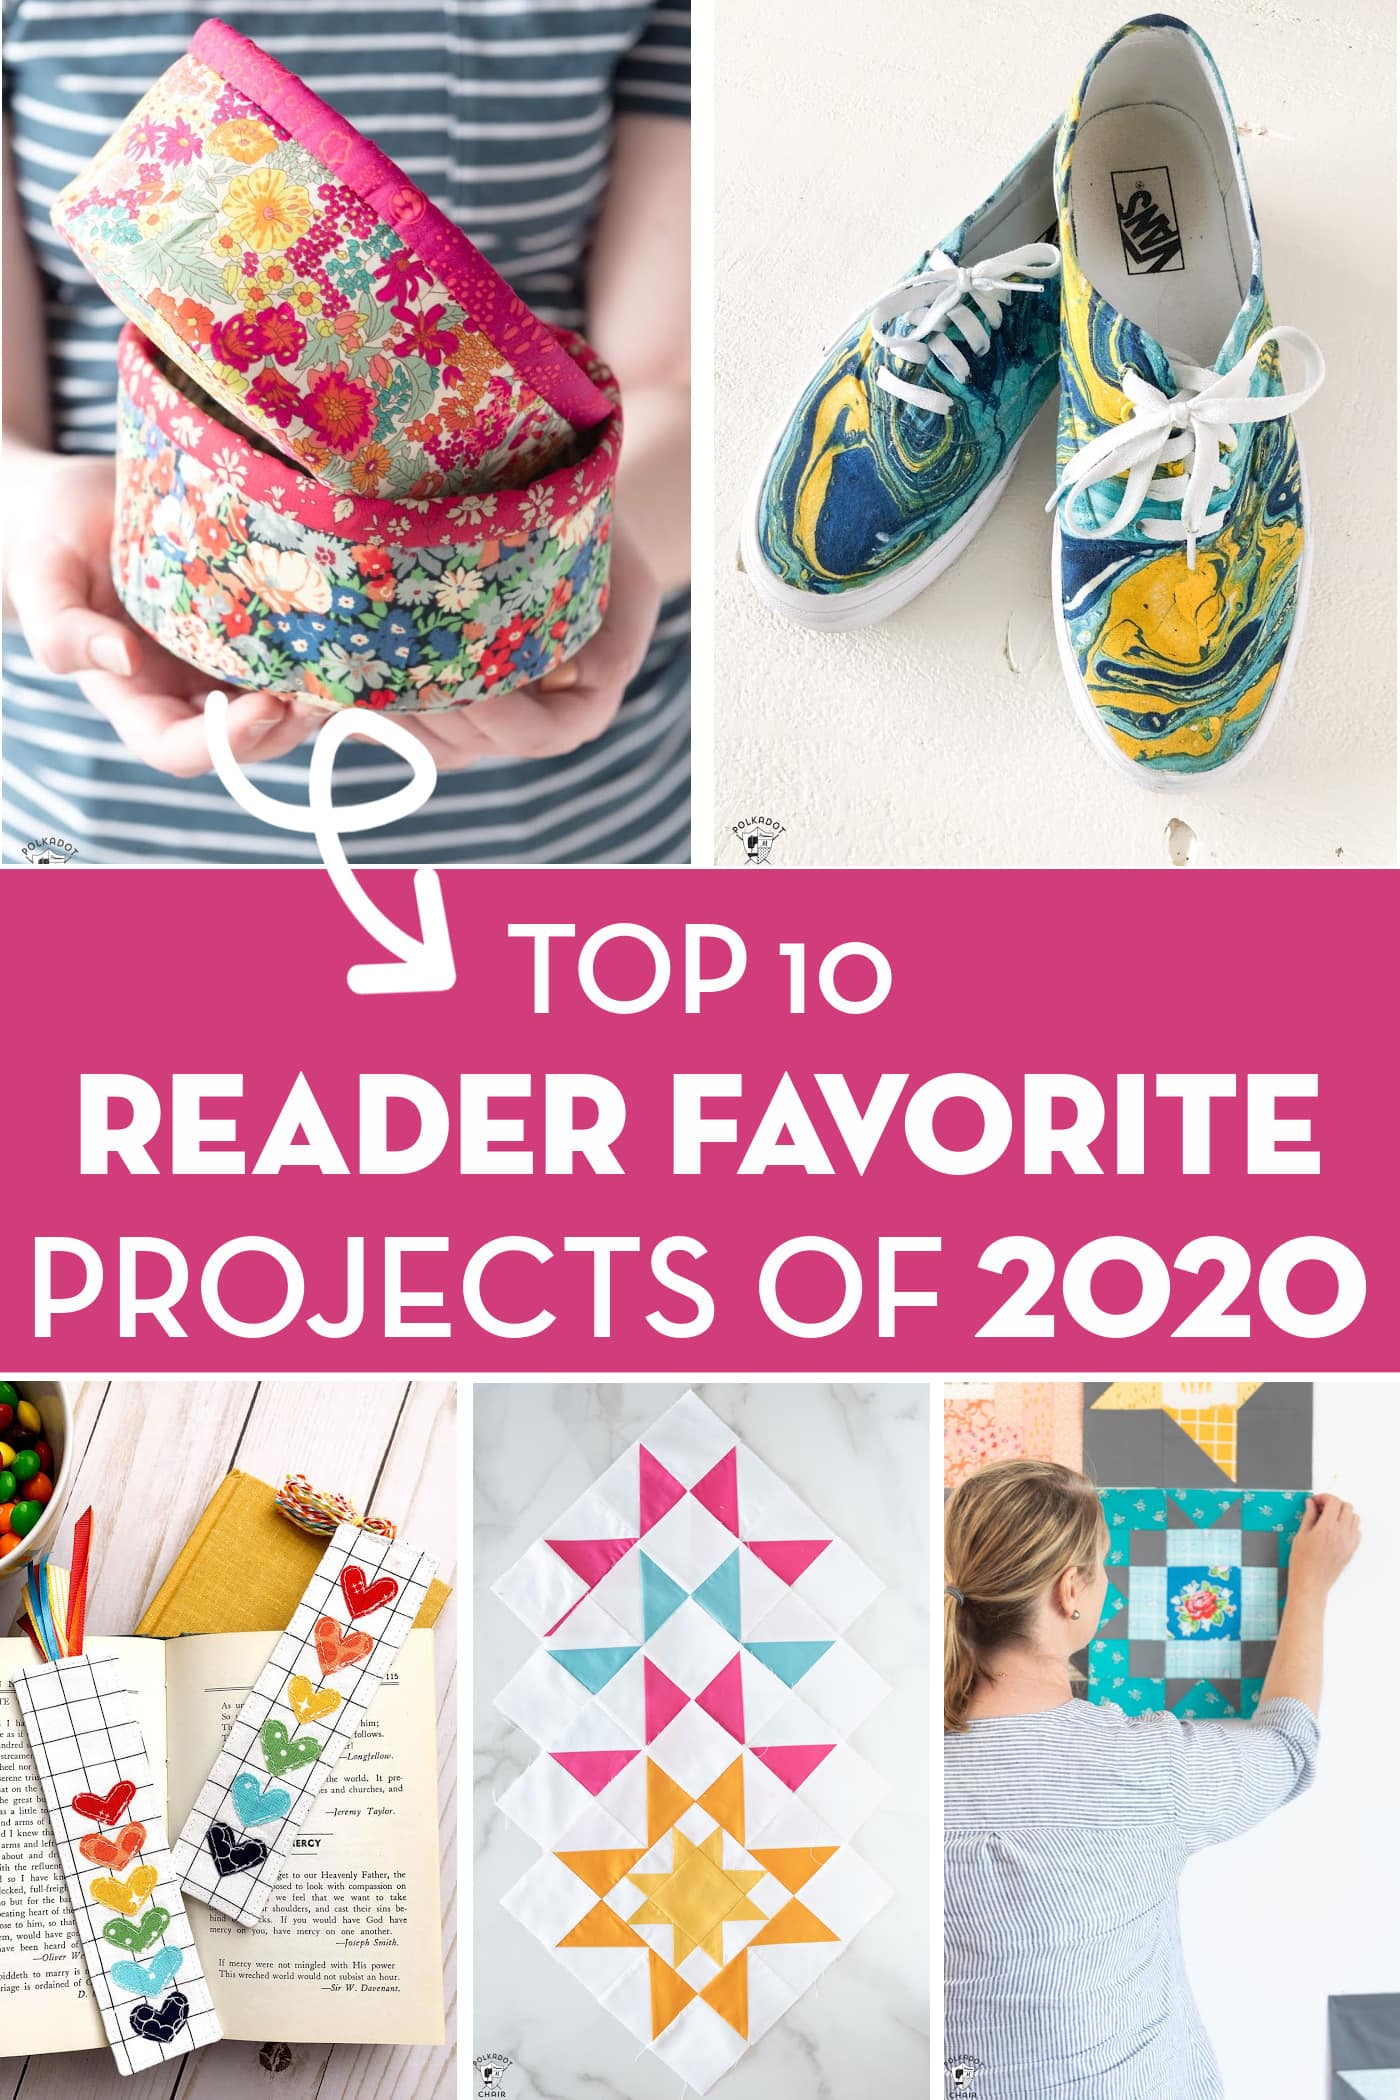 Polka Dot Chair Top 10 Blog Posts & Projects from 2020